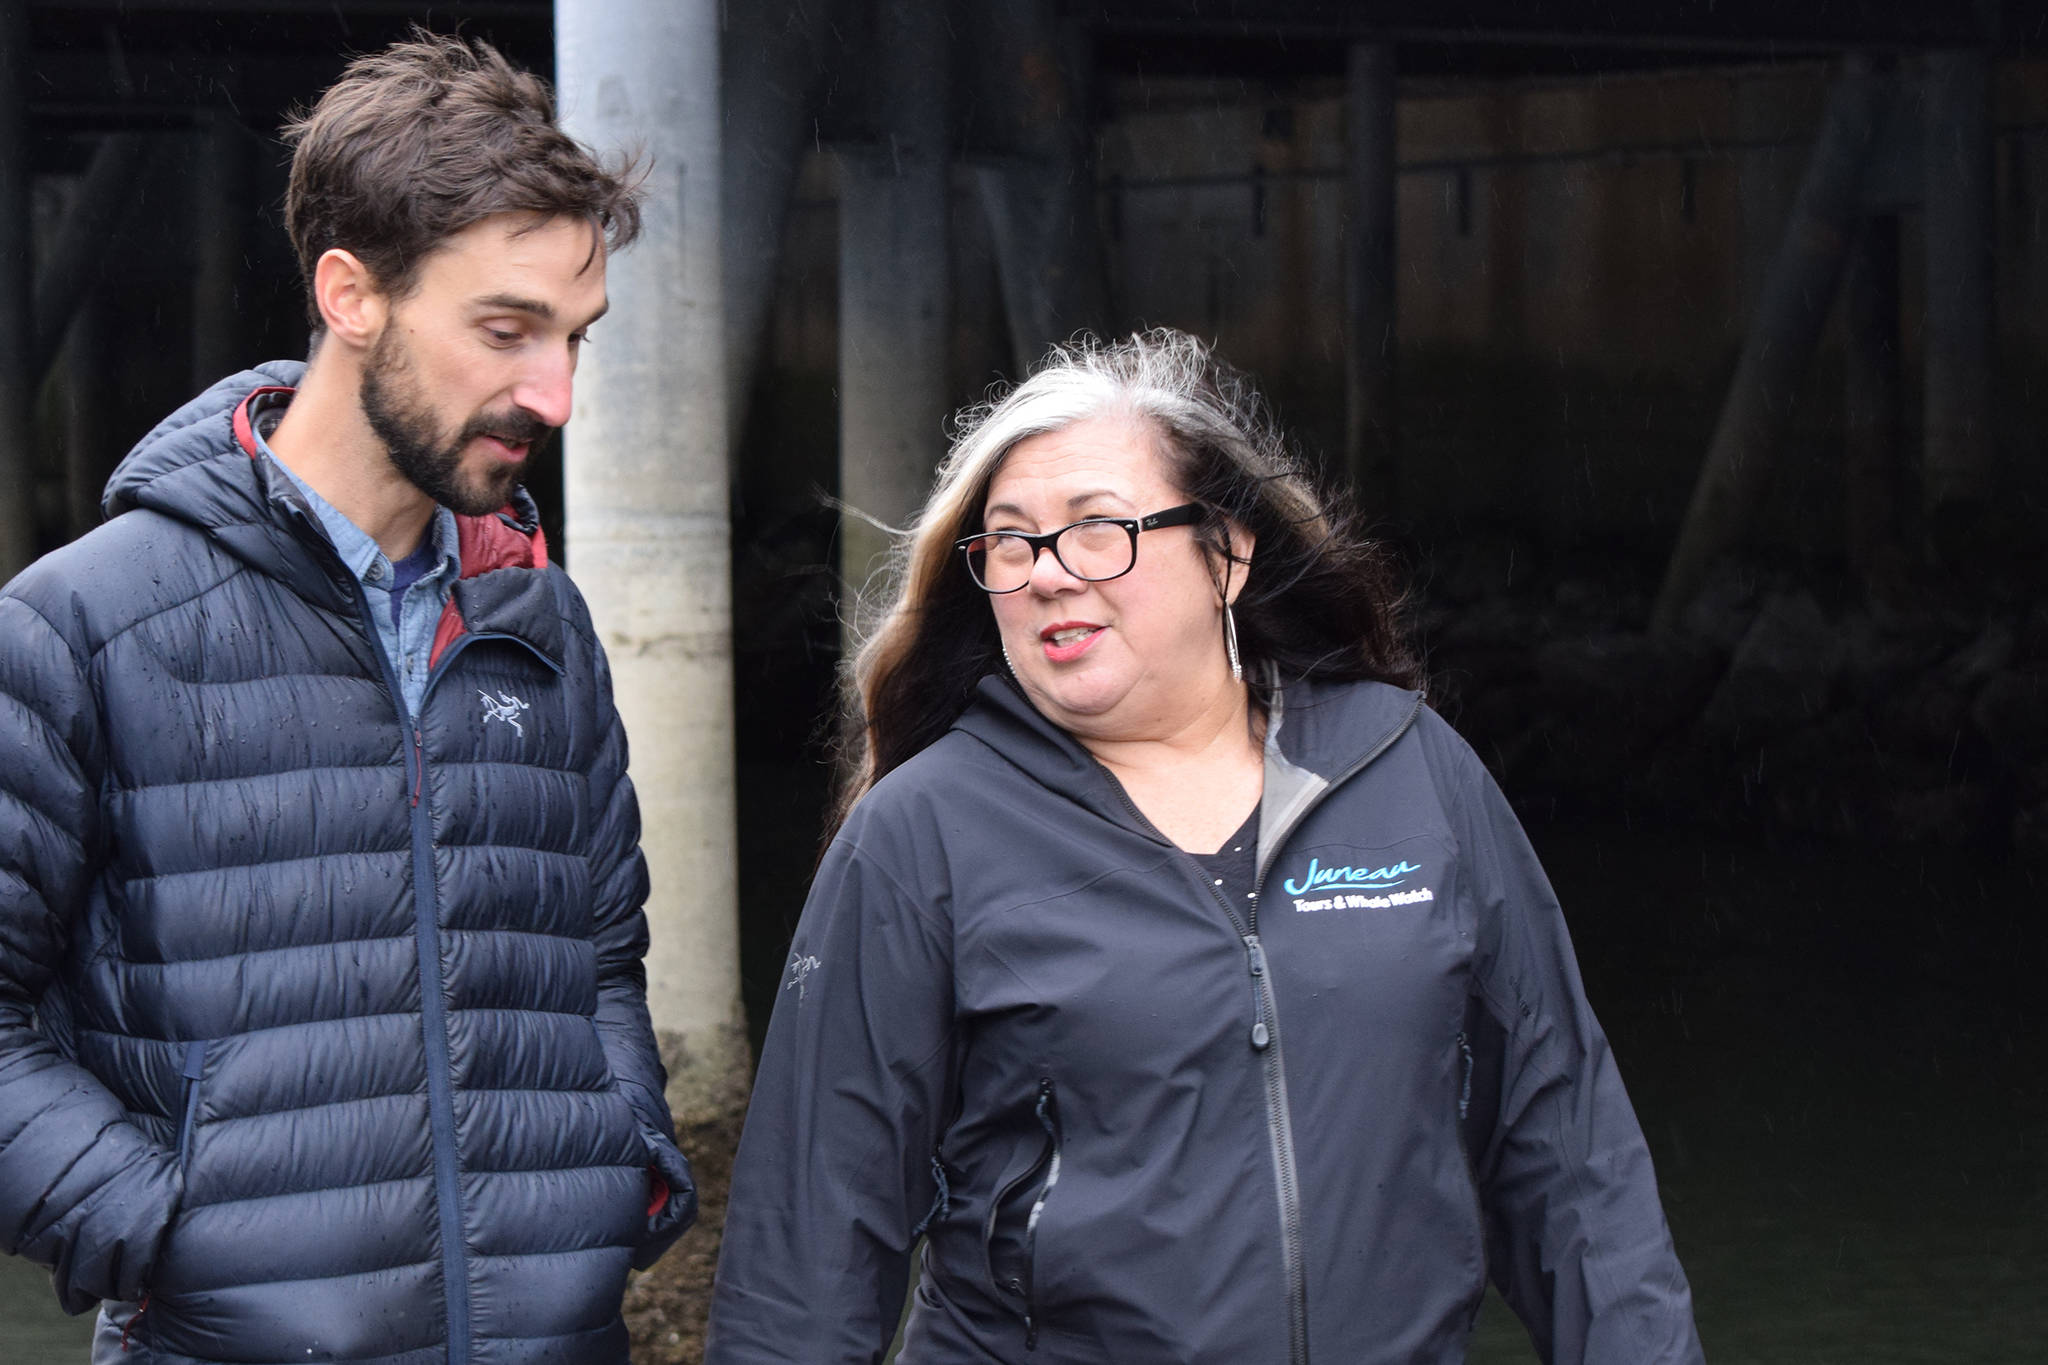 Juneau Tours & Whale Whale General Manager Serene Hutchinson talks with Alaska Shore Tours owner Drew Fortner on the Juneau waterfront on Wednesday, Oct. 9, 2019. (Nolin Ainsworth | Juneau Empire)